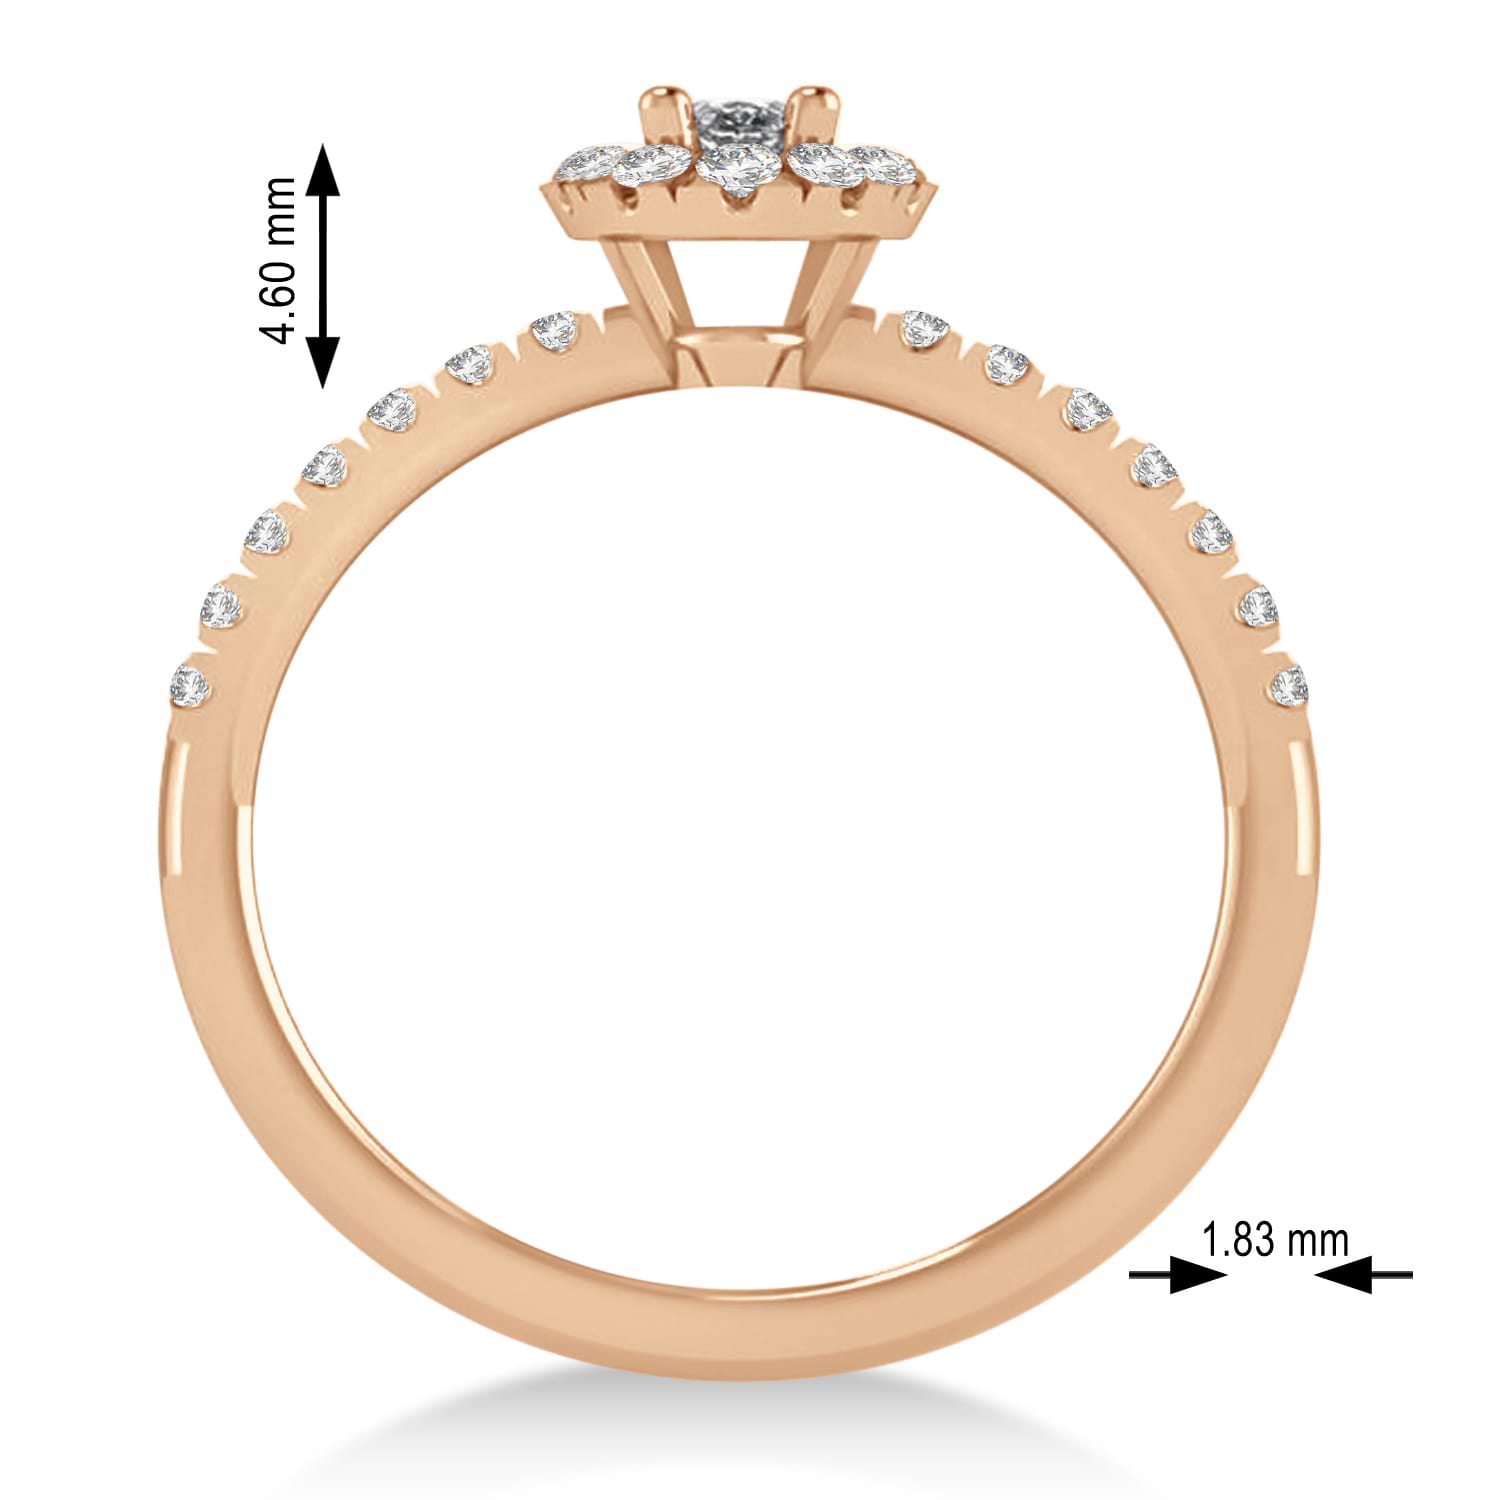 Oval Diamond Halo Engagement Ring 14k Rose Gold (0.60ct)